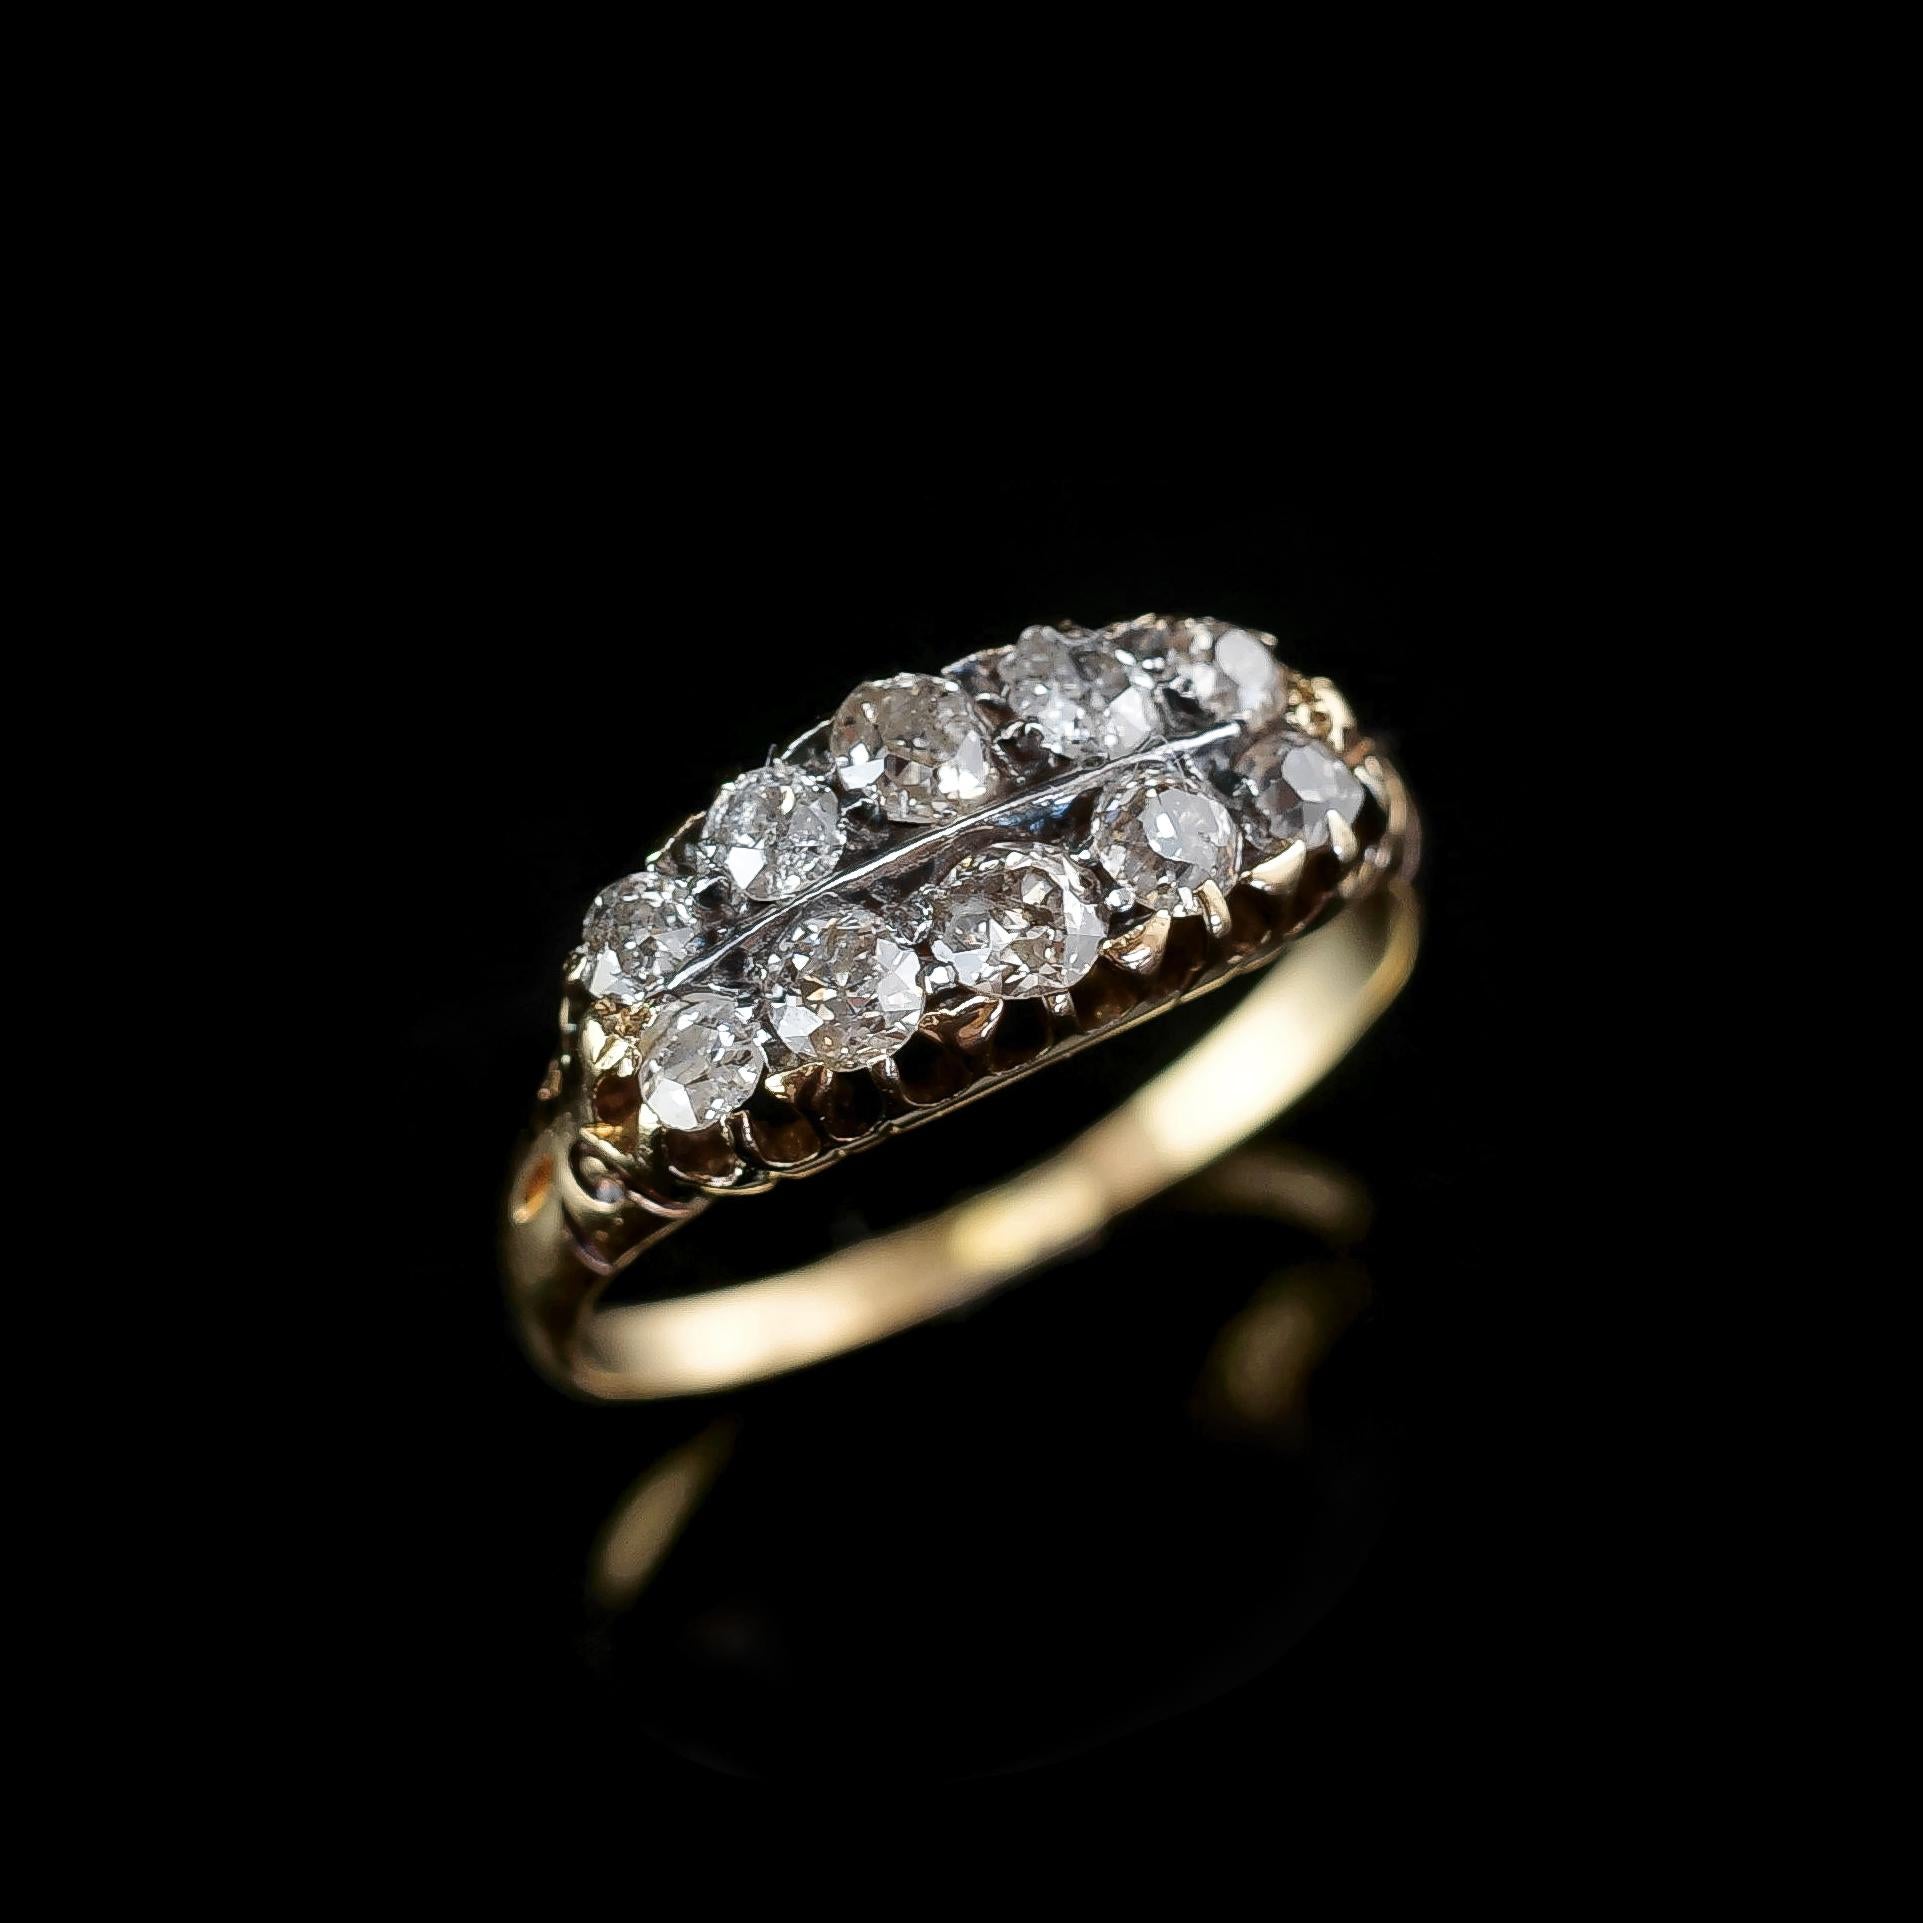 Antique Victorian 18K Gold Diamond Ring Old Cut Two Row Boat-Shaped, c.1890 For Sale 2